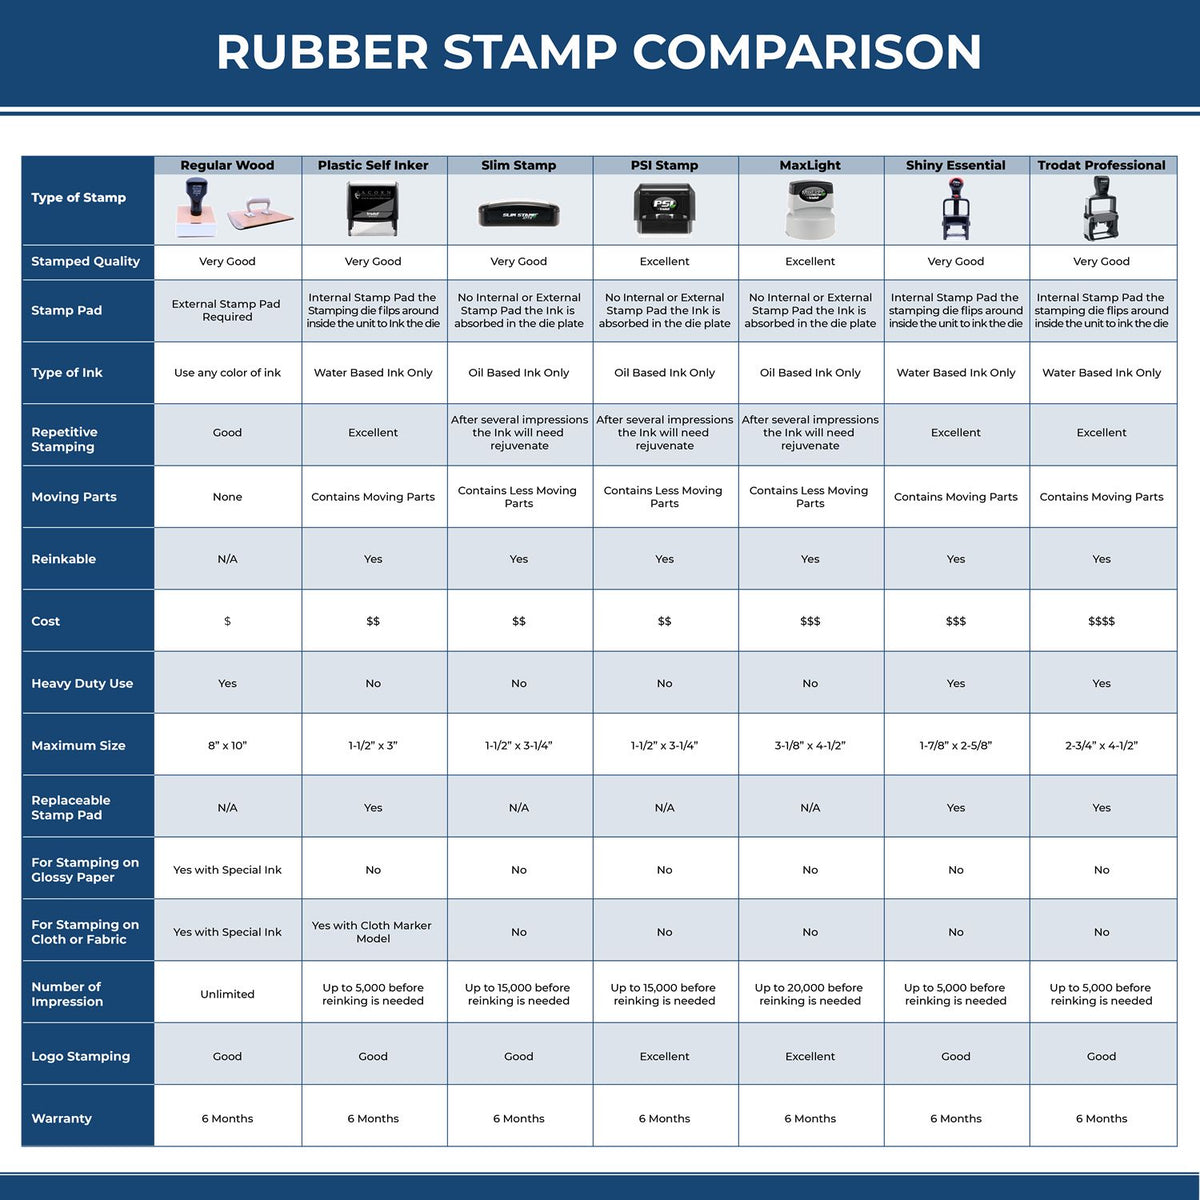 A comparison chart for the different types of mount models available for the Premium MaxLight Pre-Inked West Virginia Landscape Architectural Stamp.